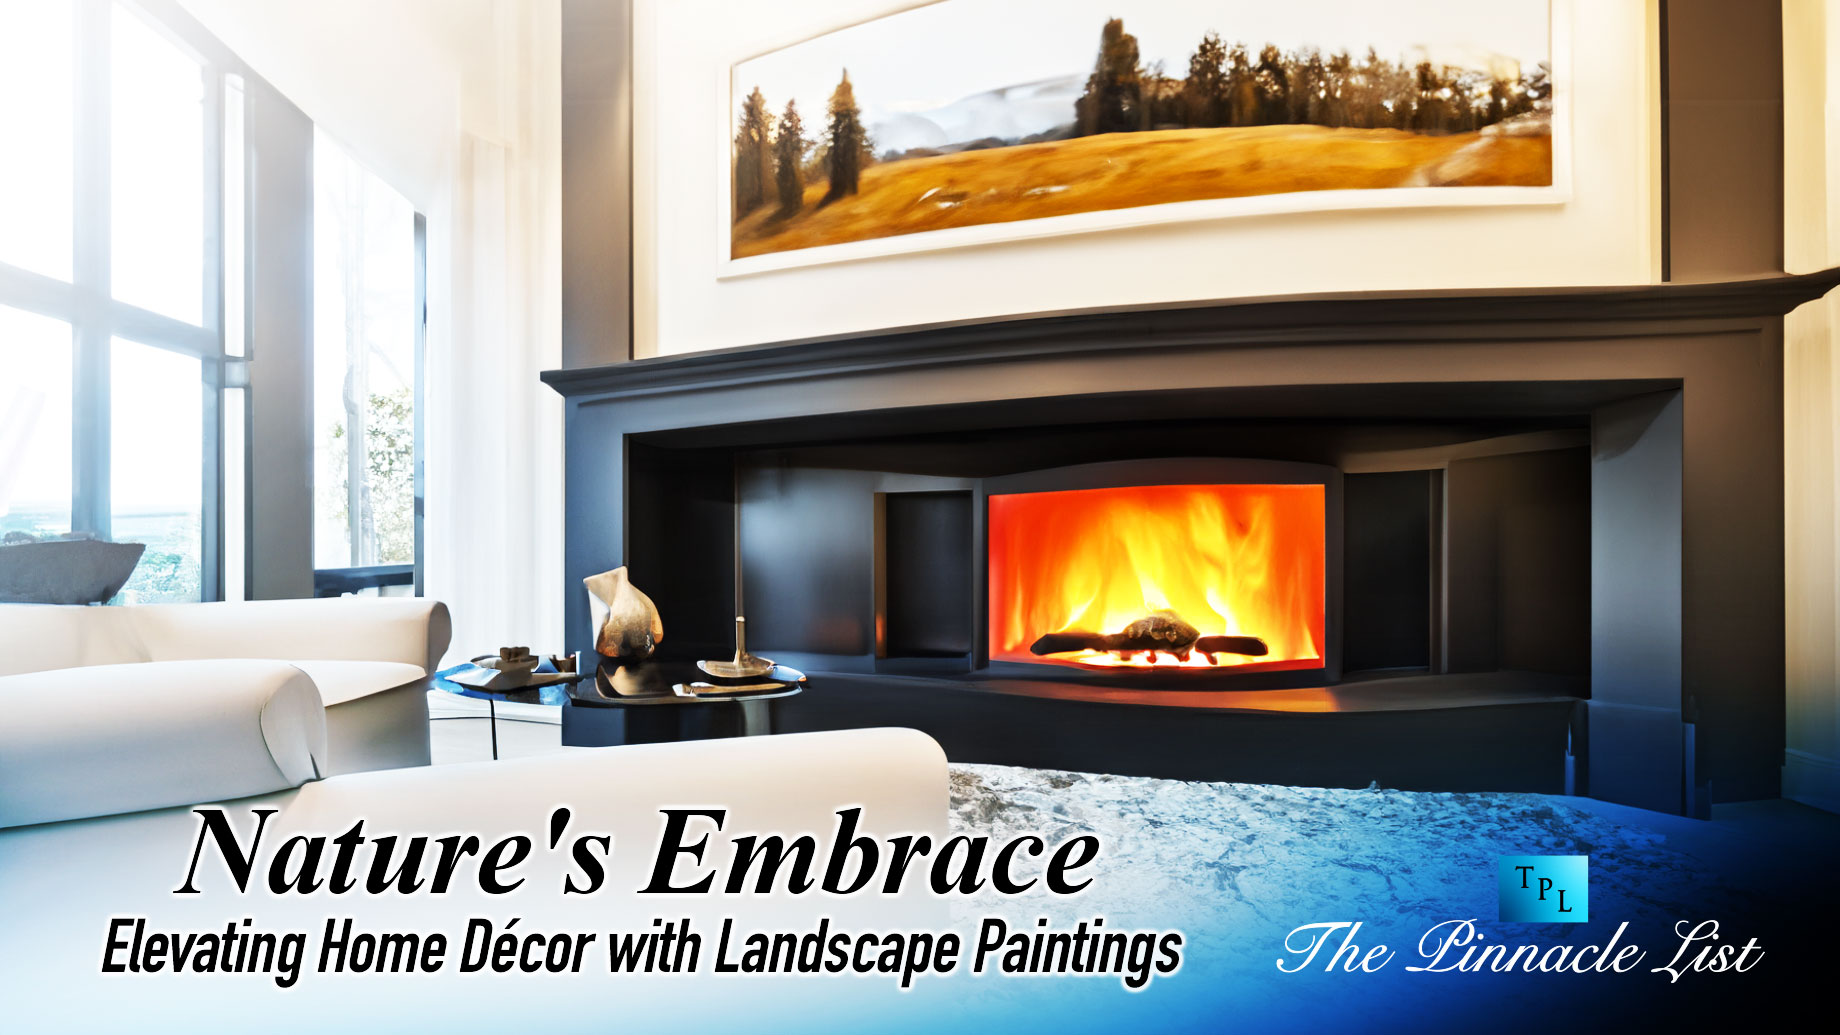 Nature's Embrace: Elevating Home Décor with Landscape Paintings